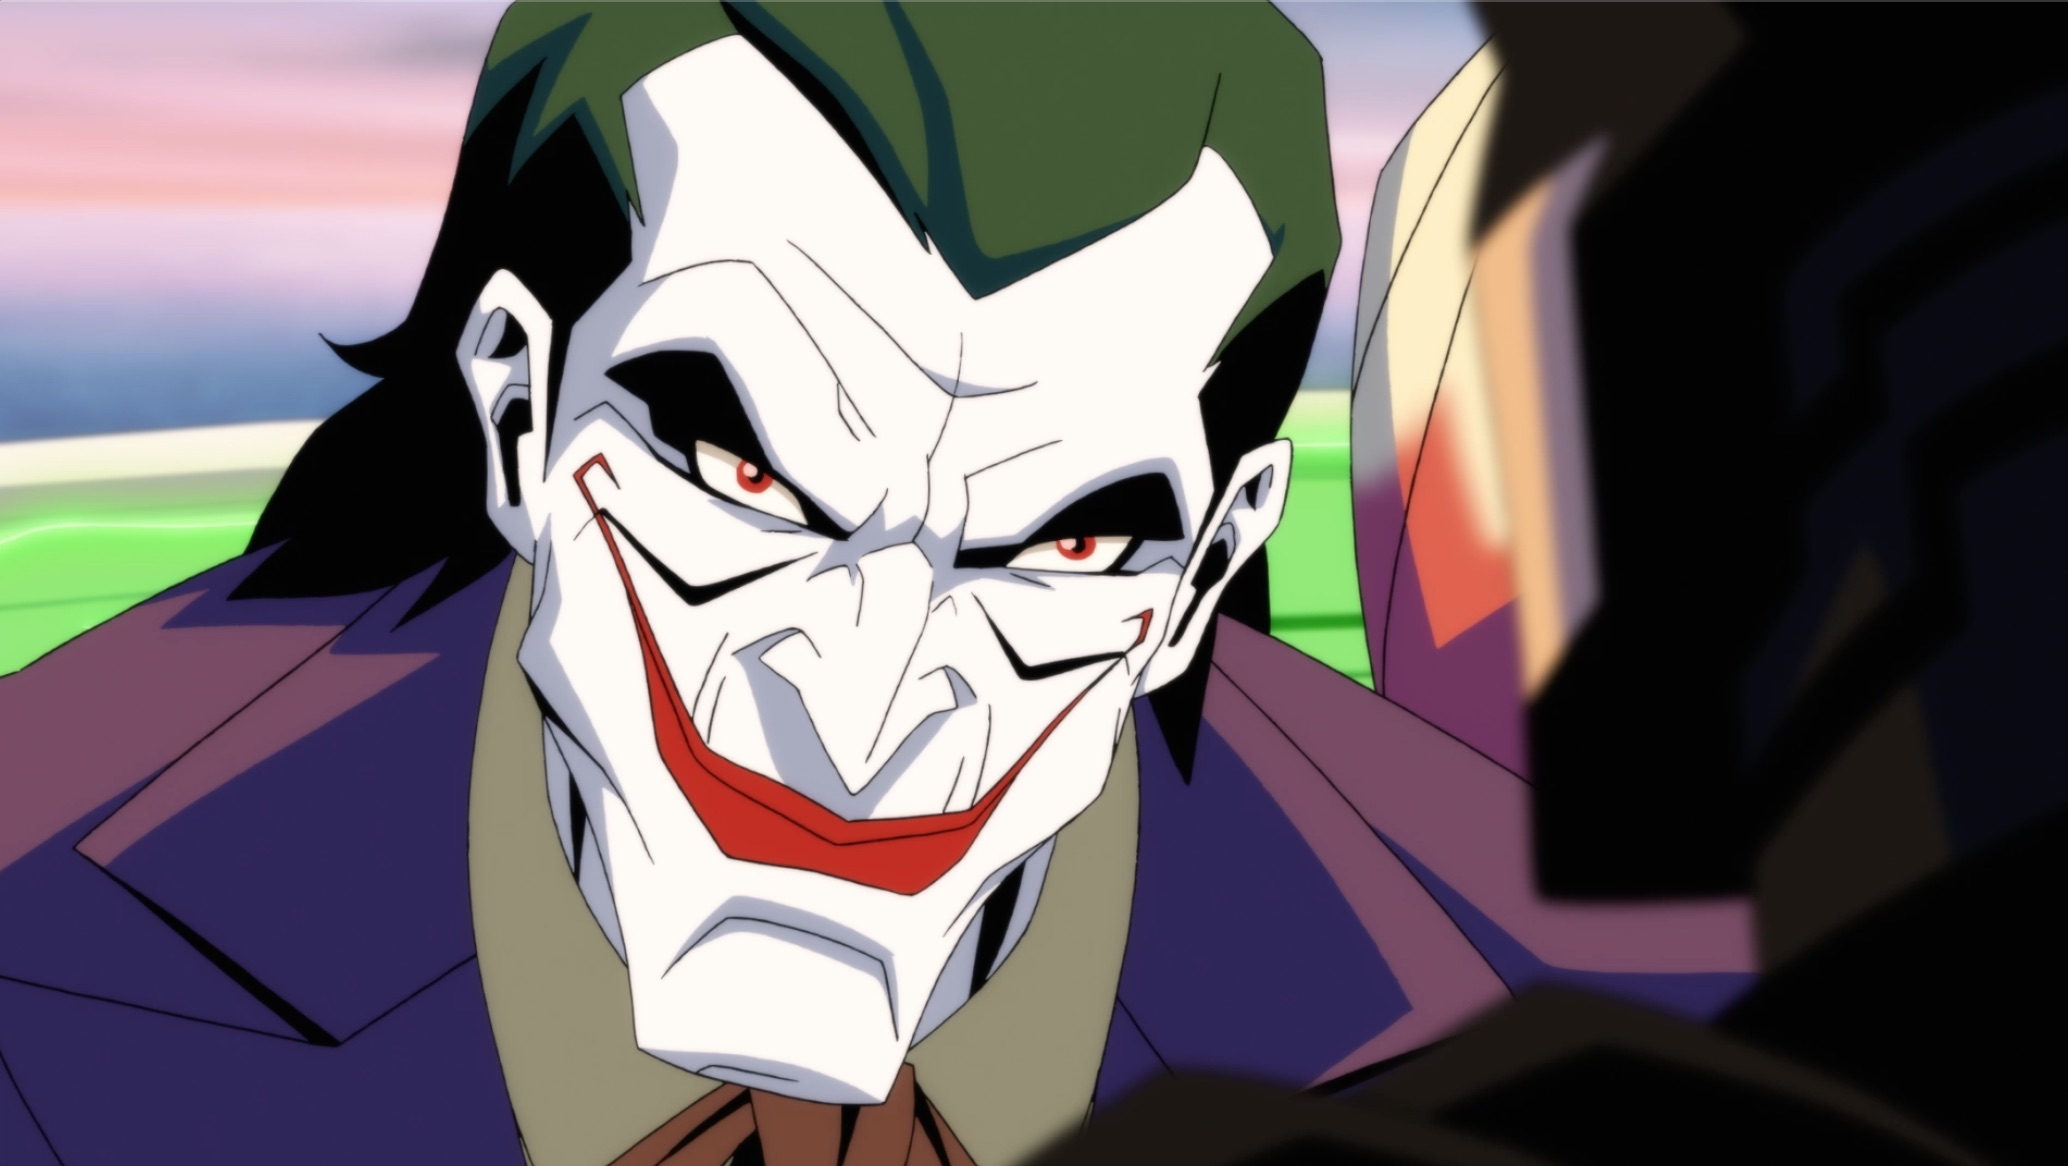 Injustice with Joker